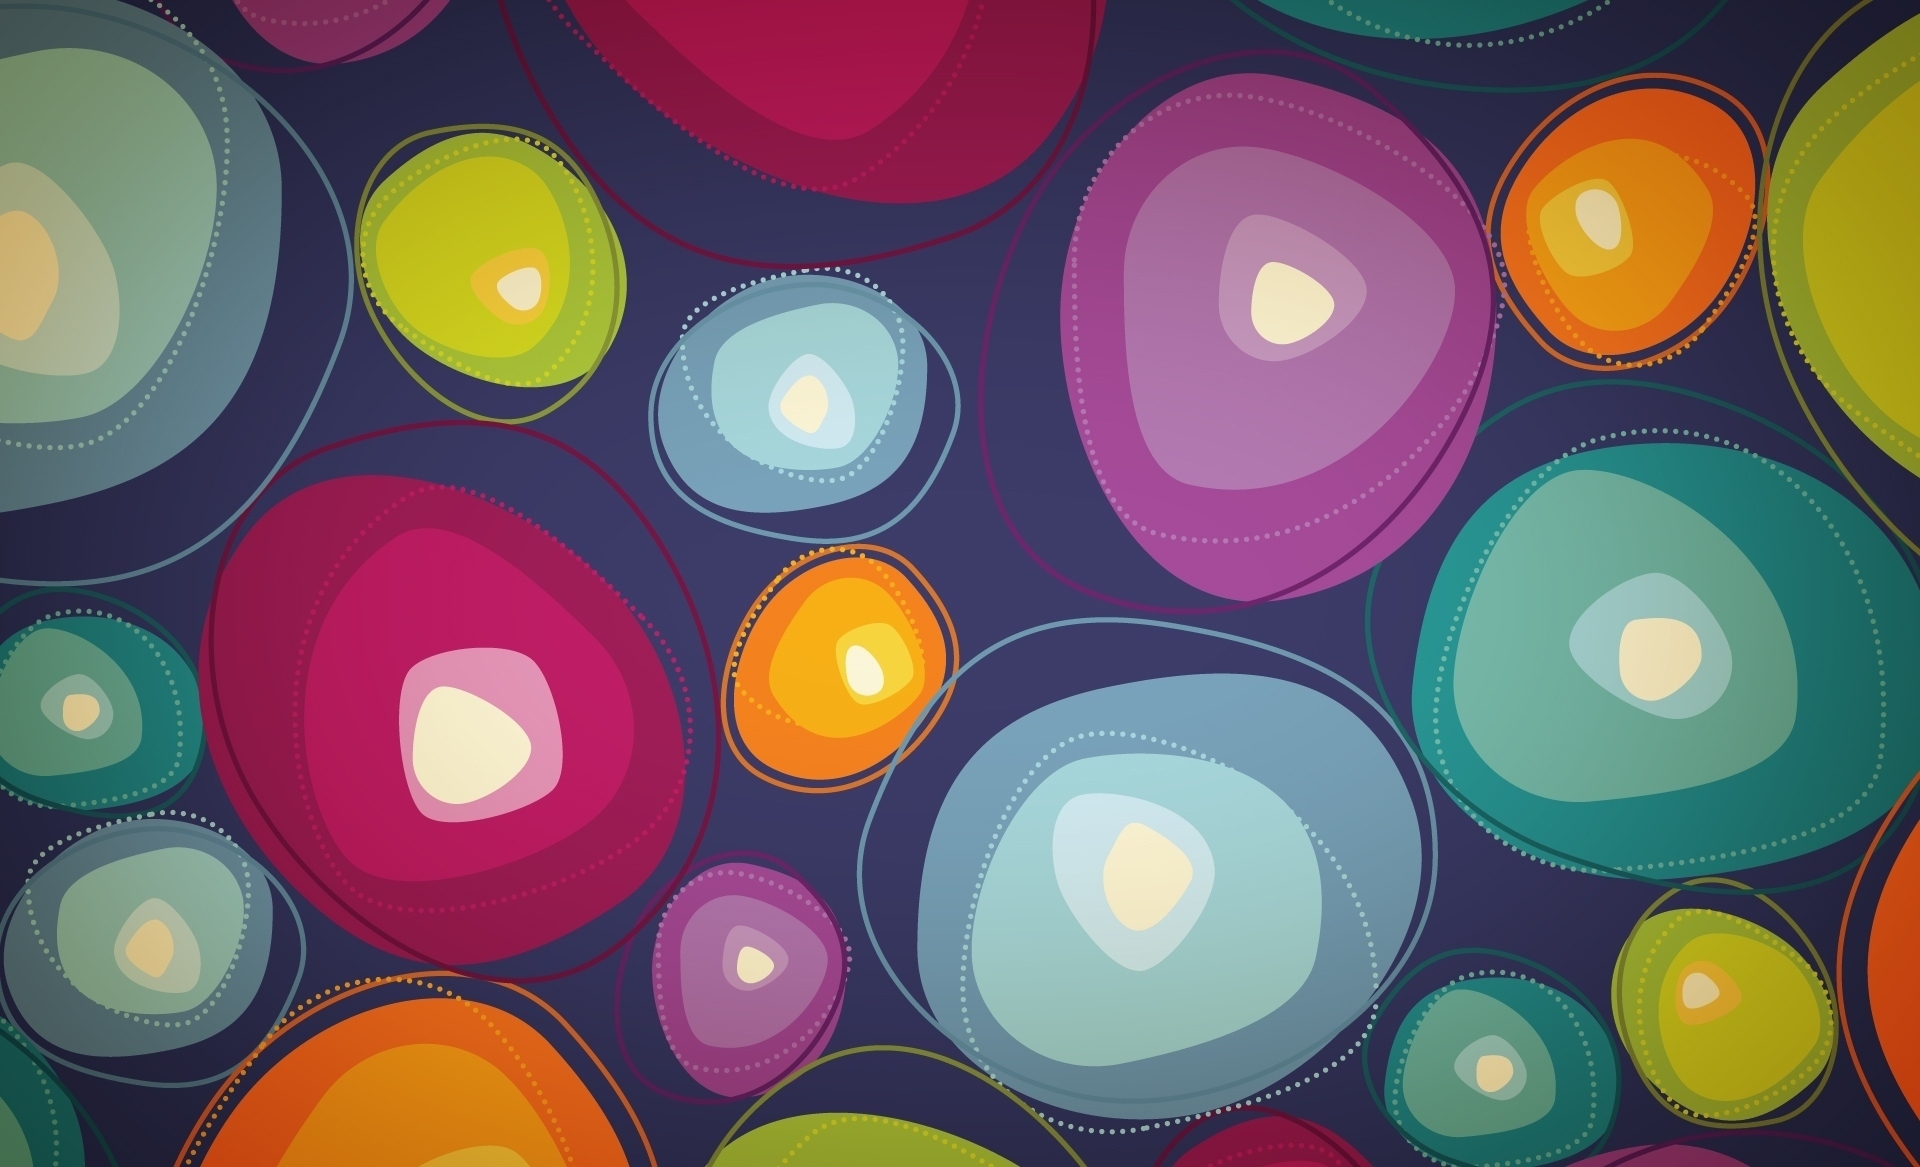 background, multicolored, circles, motley, texture, textures Image for desktop